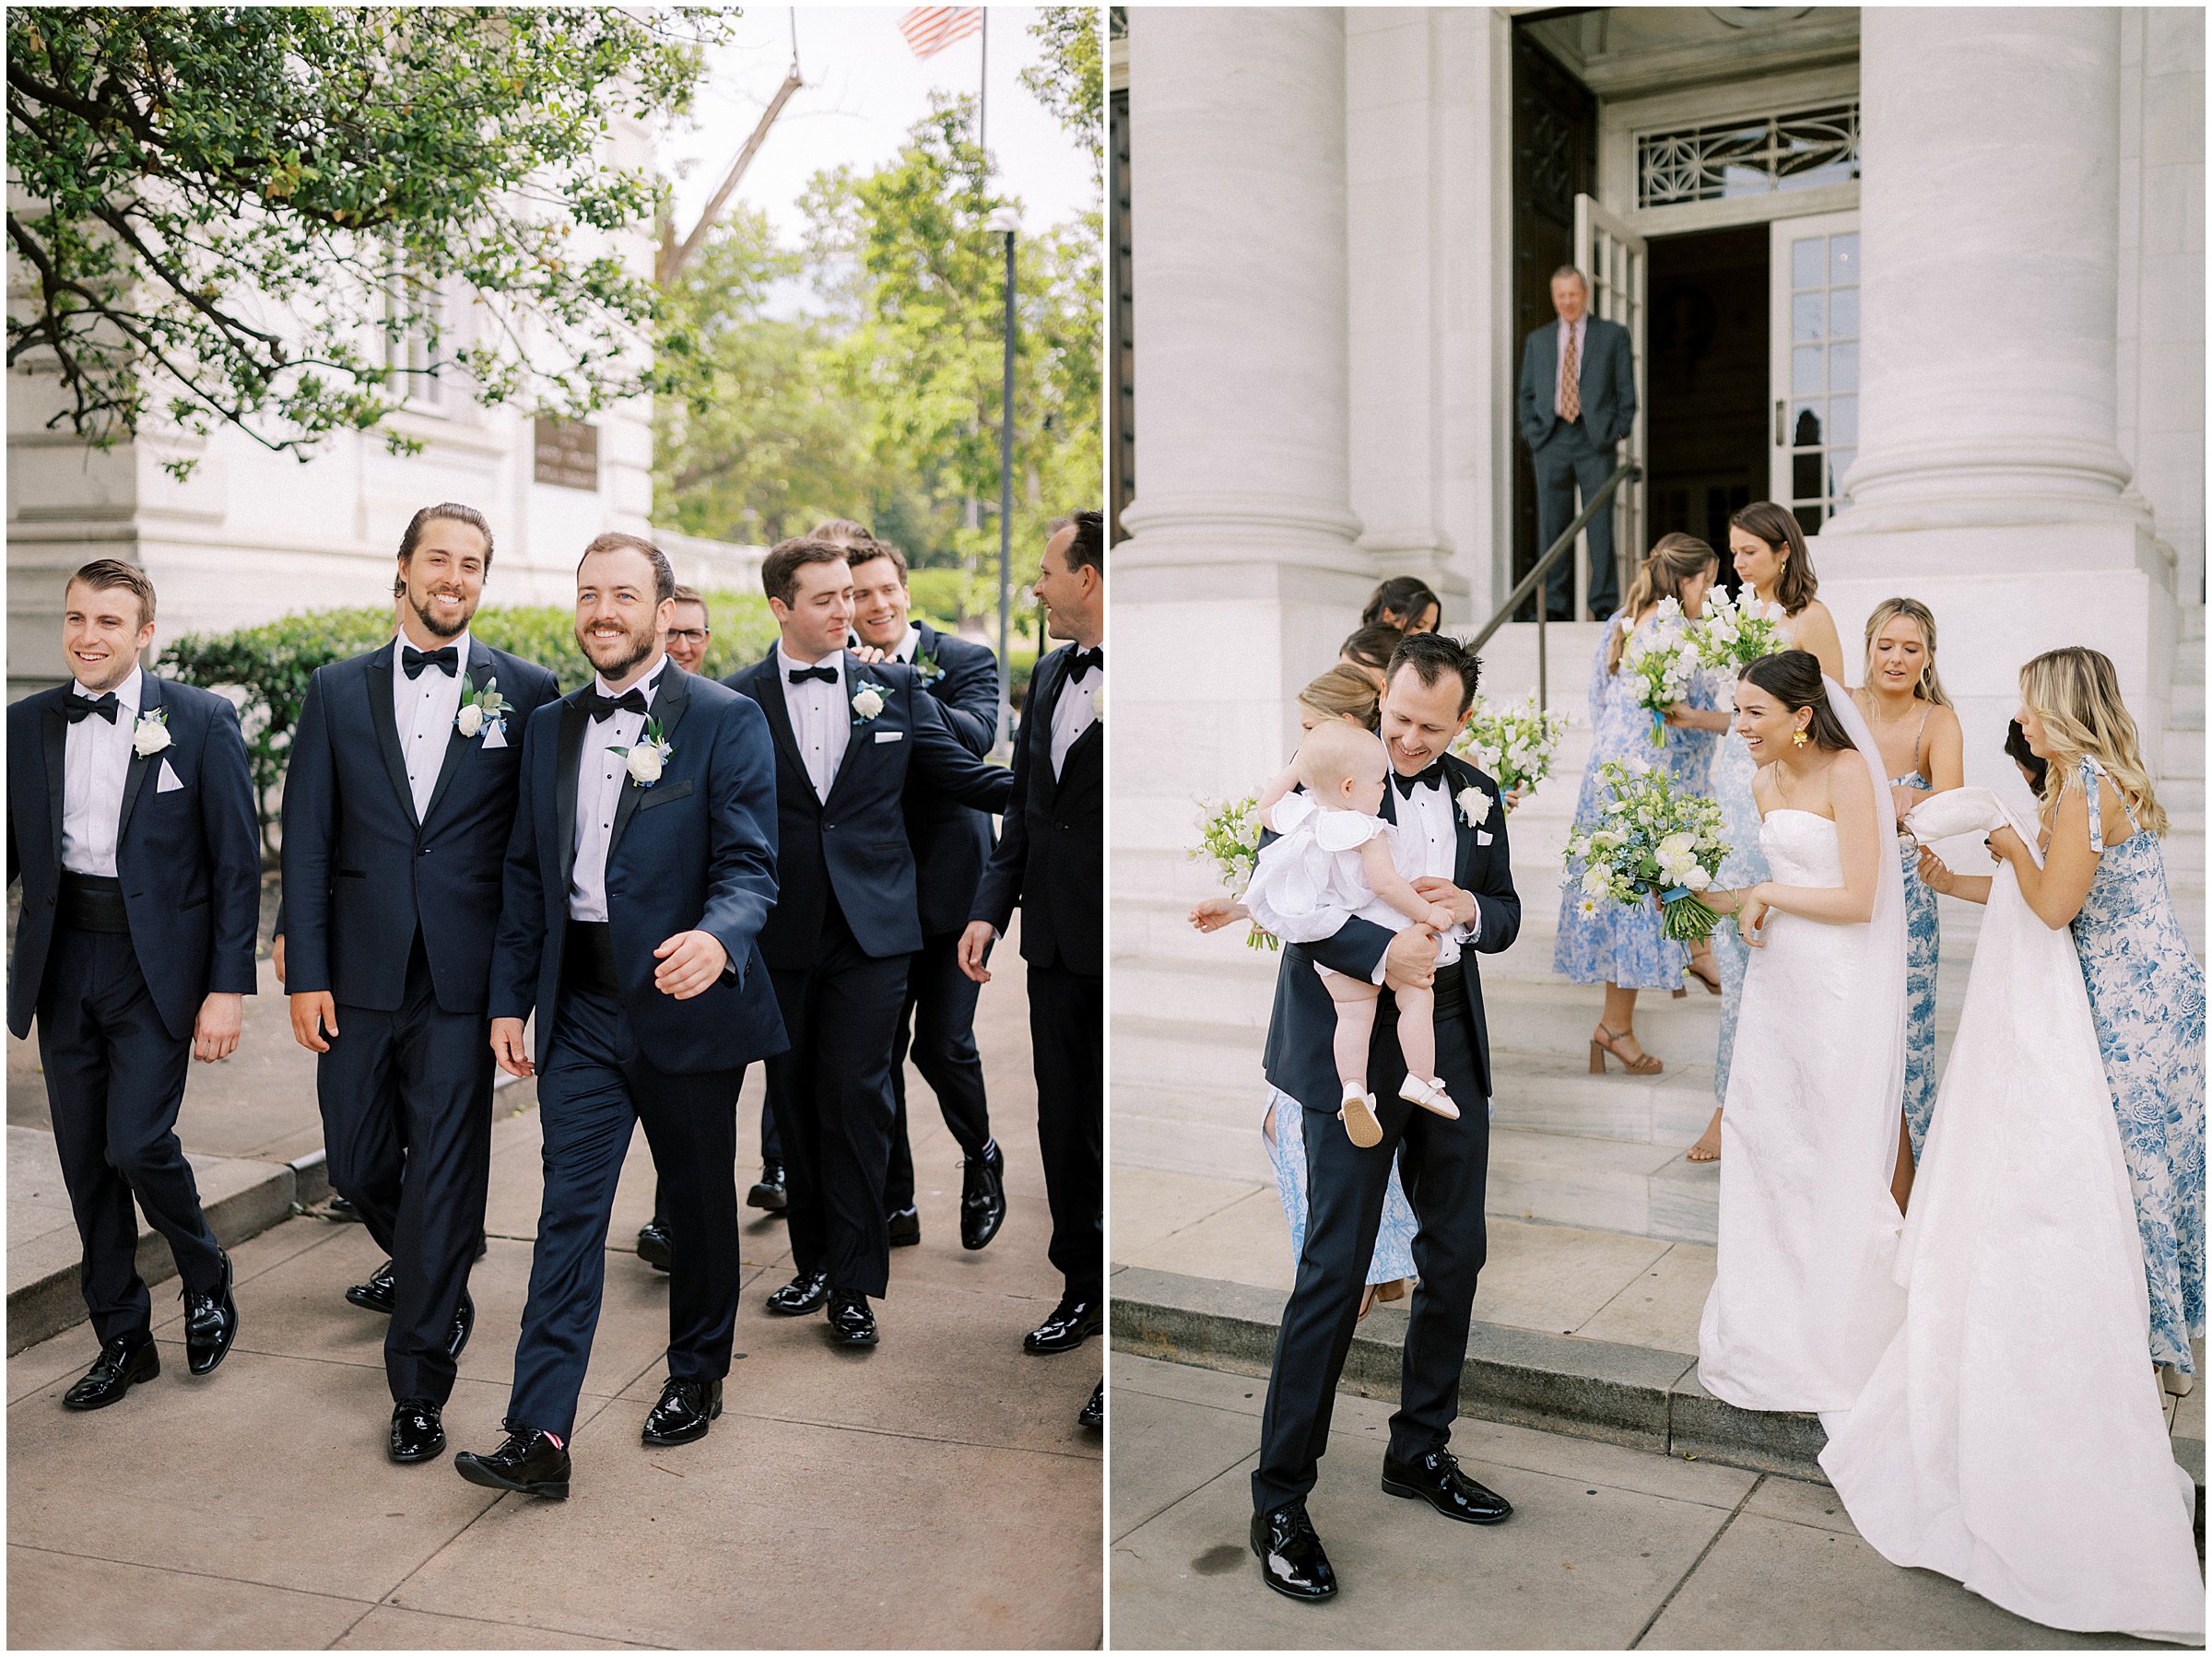 Wedding party portraits at 17th Street Entrance, DAR Constitution Hall